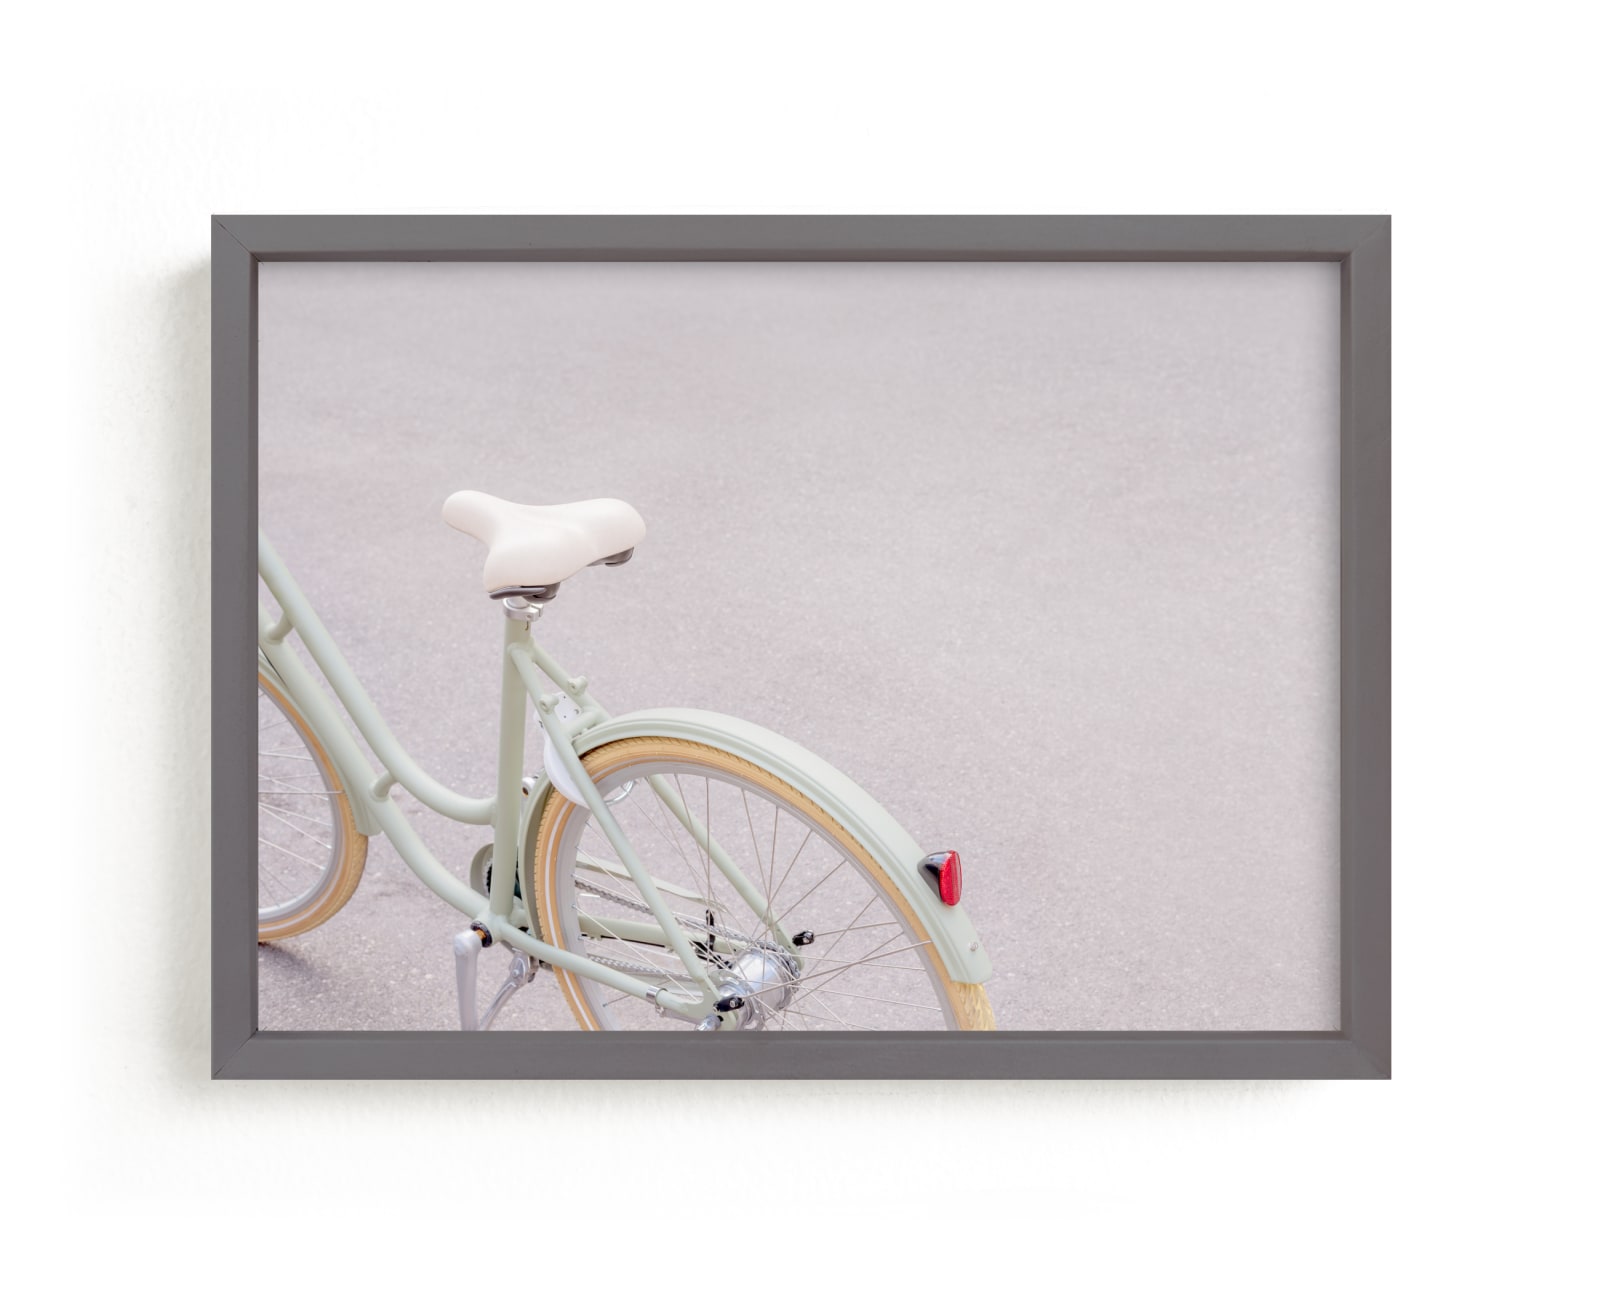 "The Bike" by Paola Benenati in beautiful frame options and a variety of sizes.